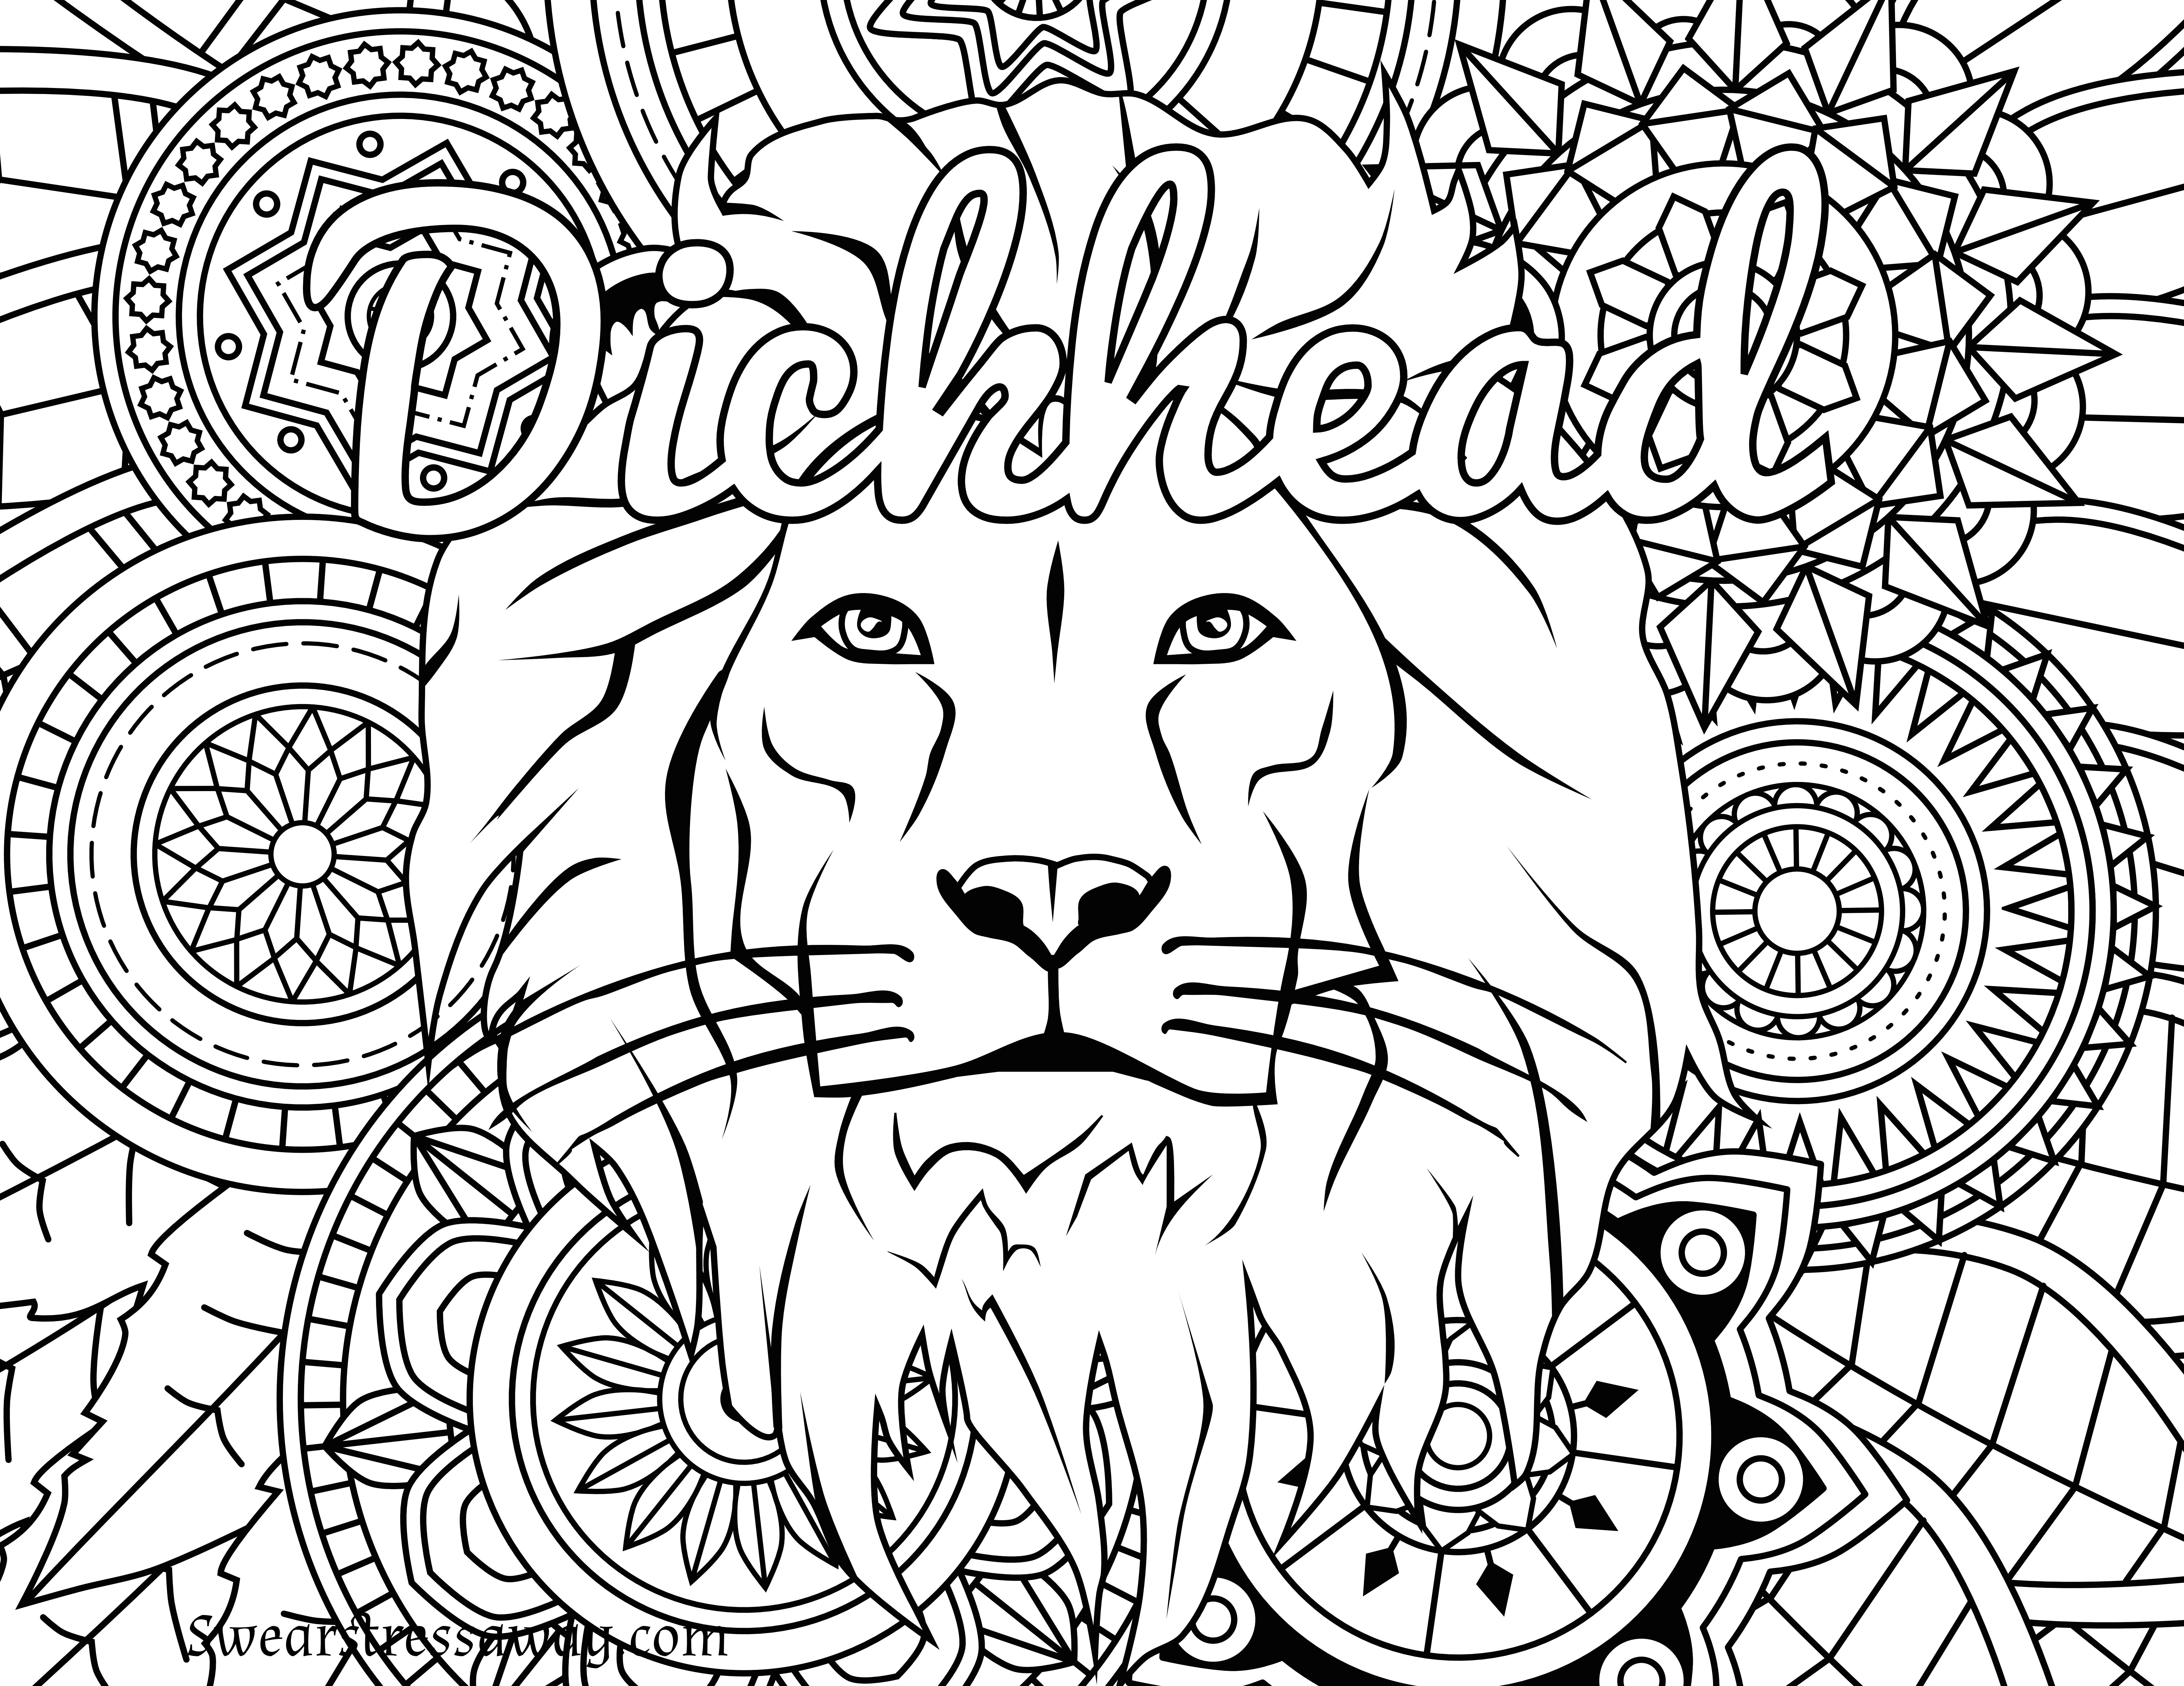 Swear Words Coloring Pages - Lezincnyc - Swear Word Coloring Pages Printable Free